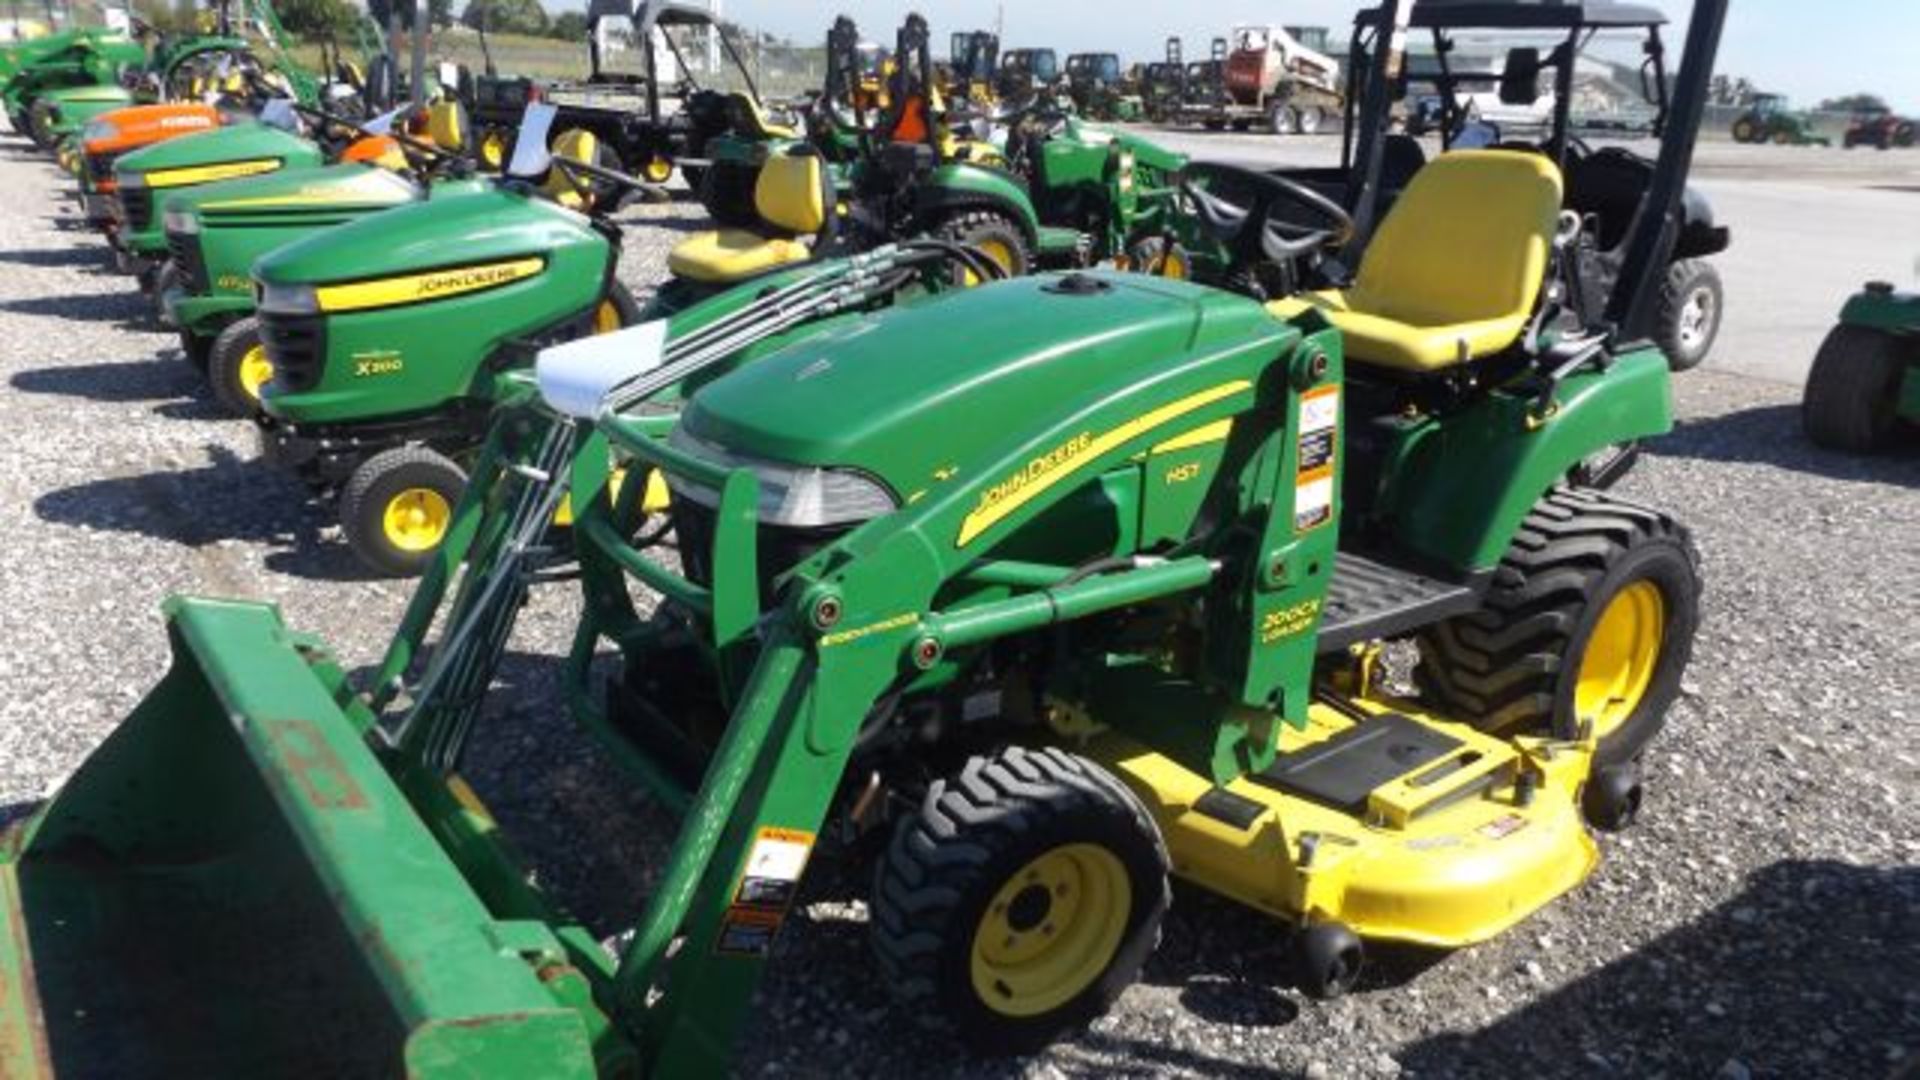 2009 JD 2305 Compact Tractor #111777, 415 hrs, MFWD, 24hp Yanmar, 2 sp Hydro, R4 Tires, Mid and Rear - Image 2 of 3